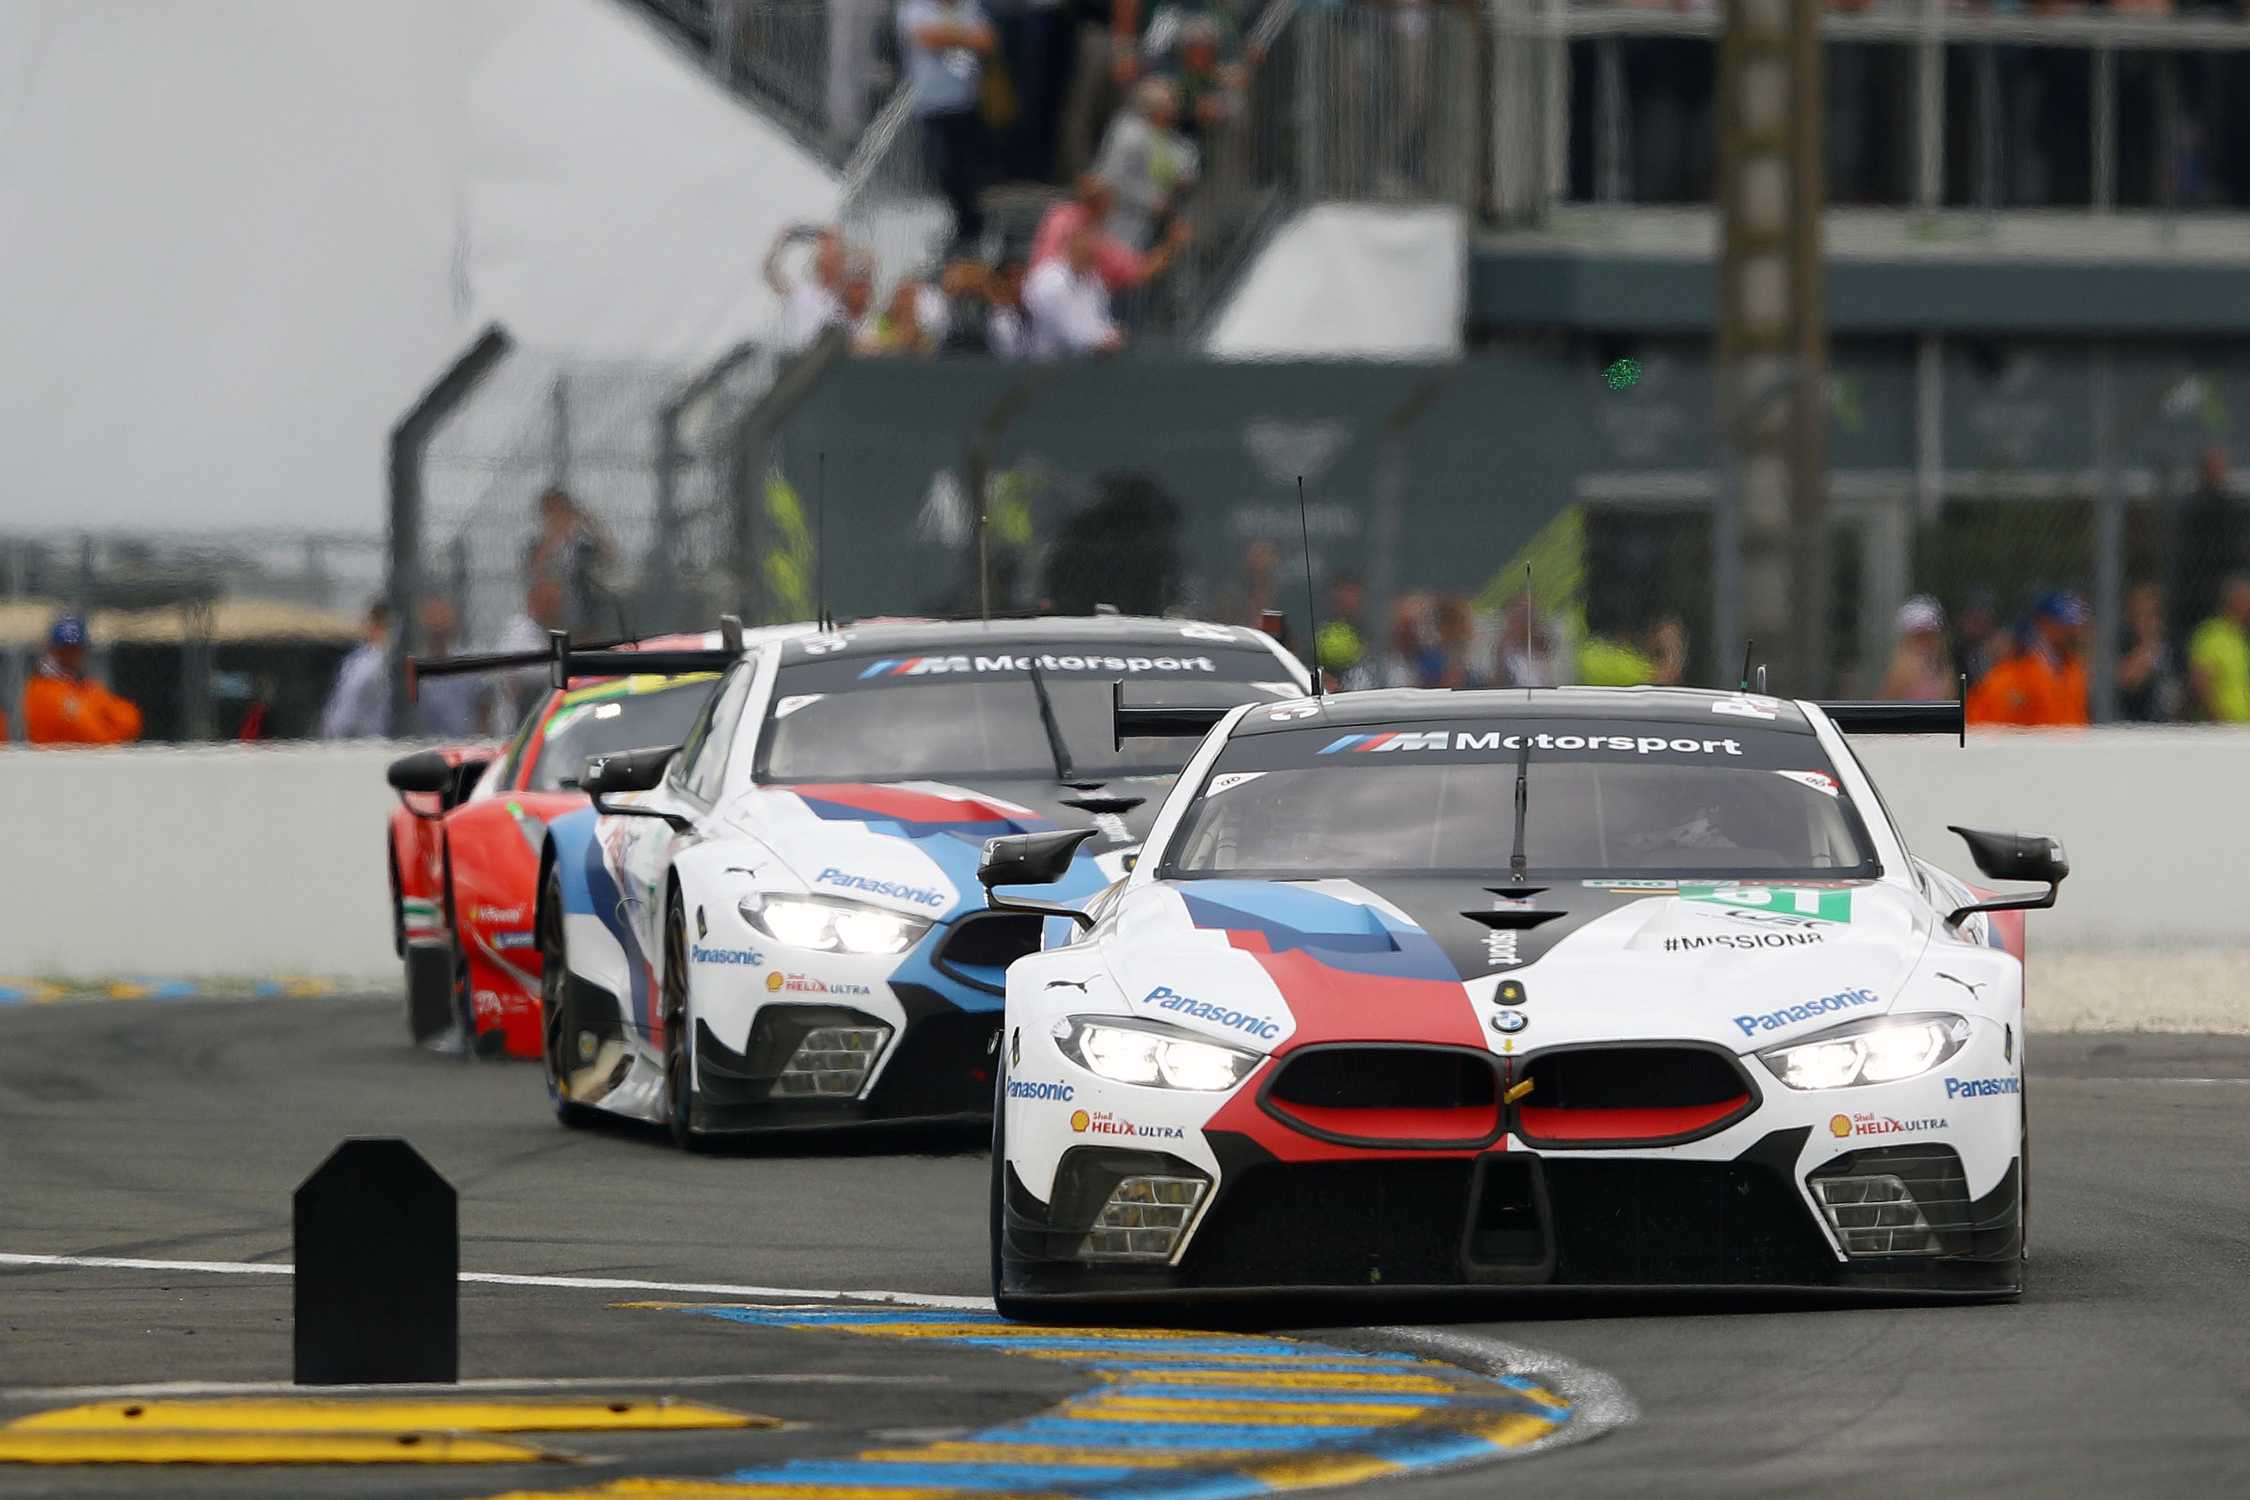 akademisk vedholdende Opiate BMW M8 GTE 'in the mix' in the opening hours of Le Mans.